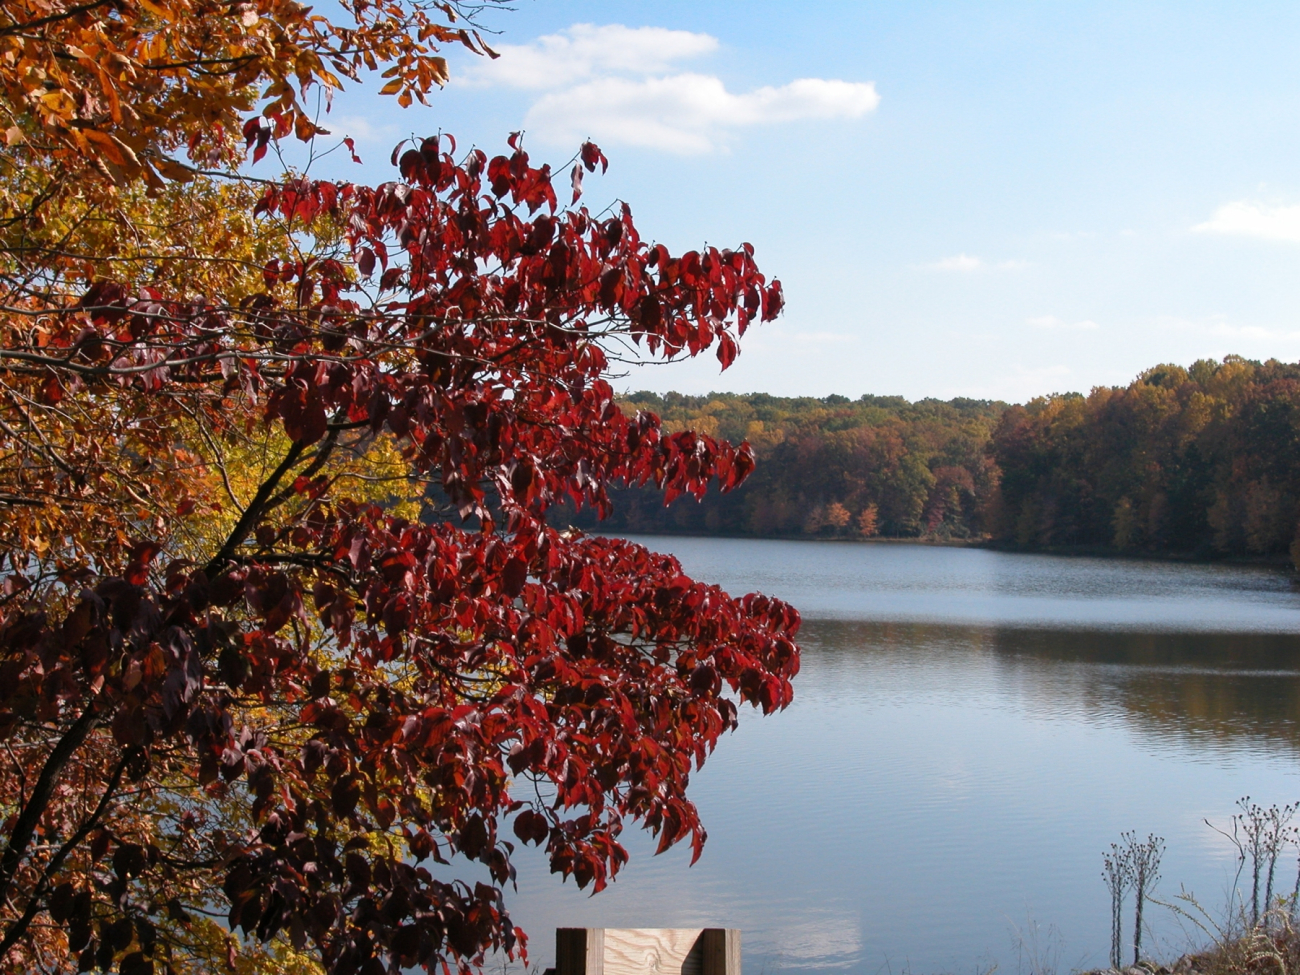 A fall afternoon on Clopper Lake